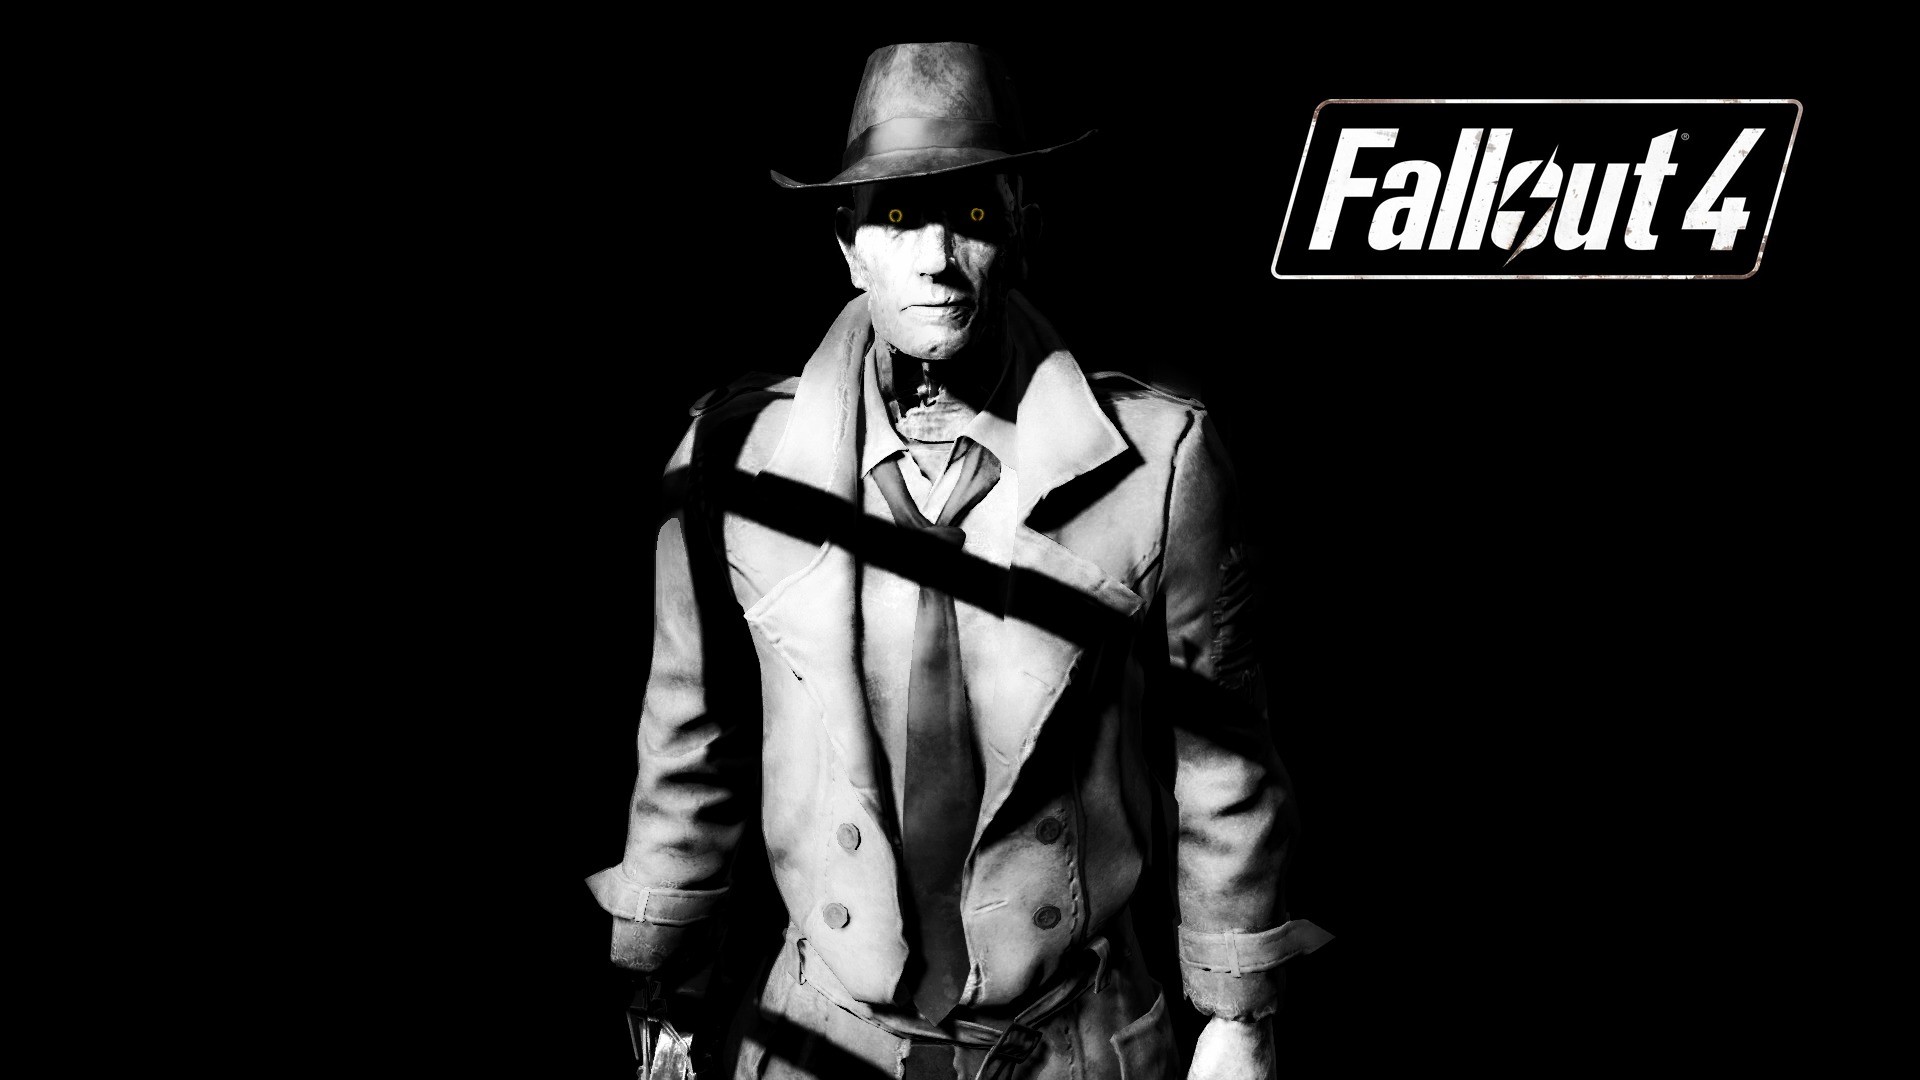 Fallout 4, Nick Valentine, Bethesda Softworks, Video Games Wallpaper